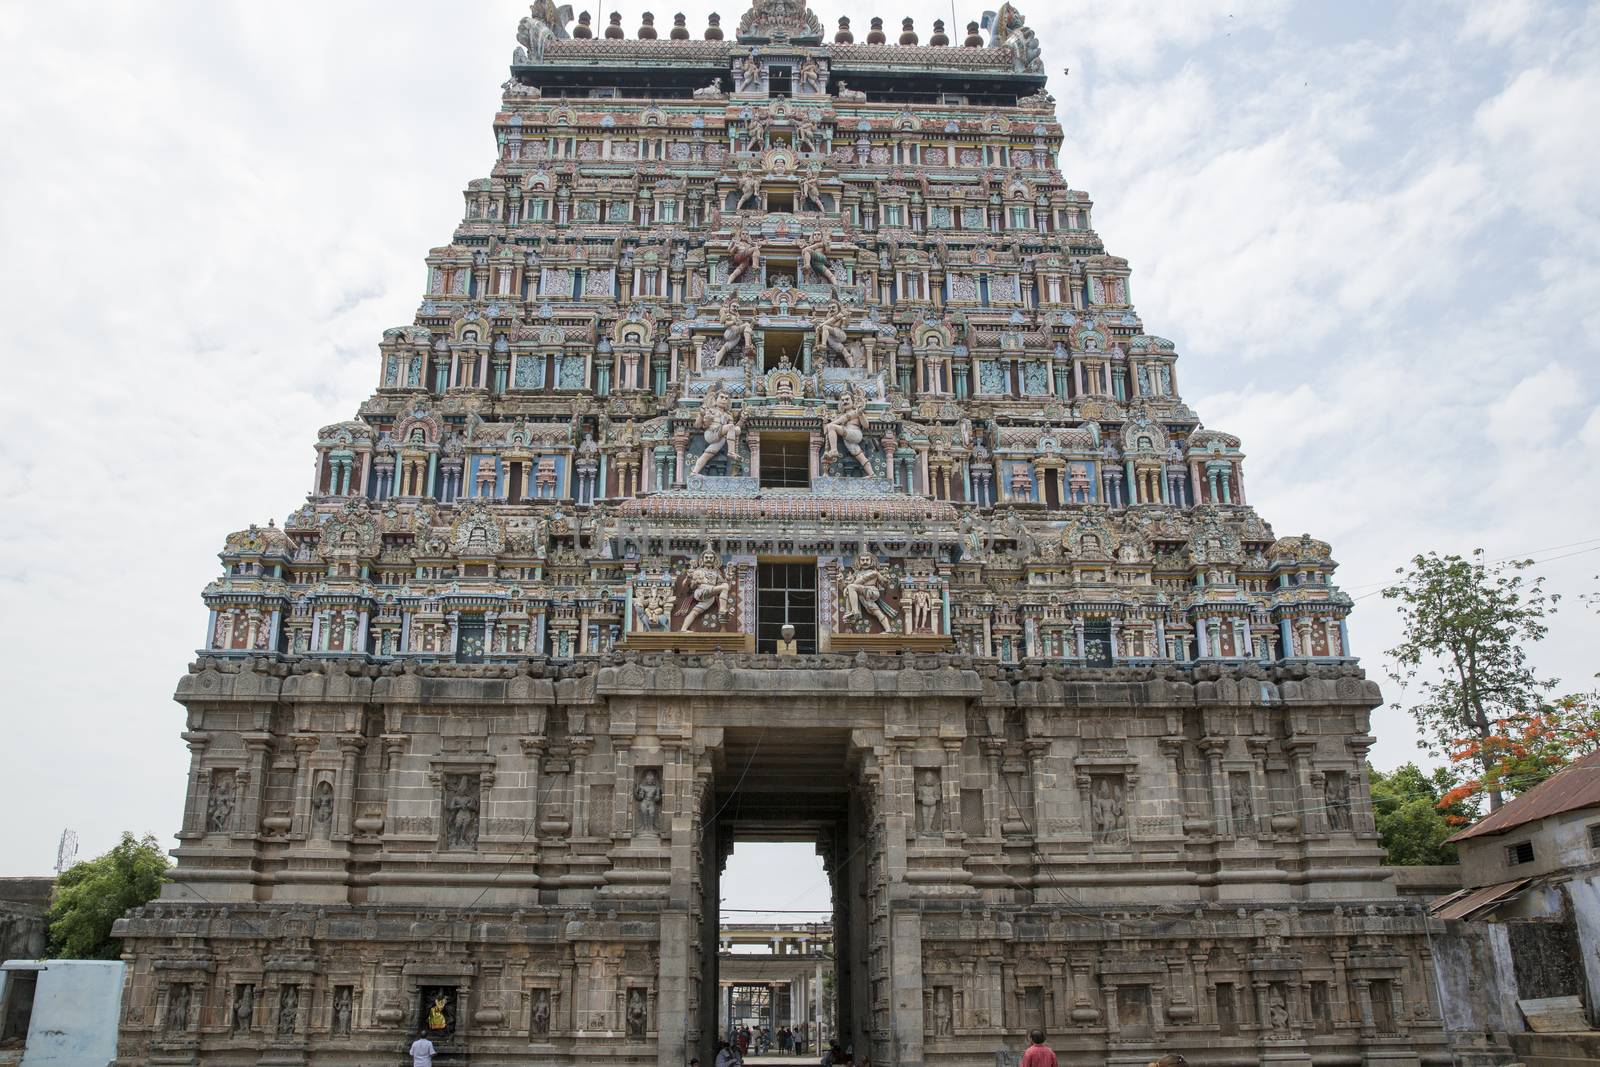 Architecture at finest in the Chidambaram temple South India